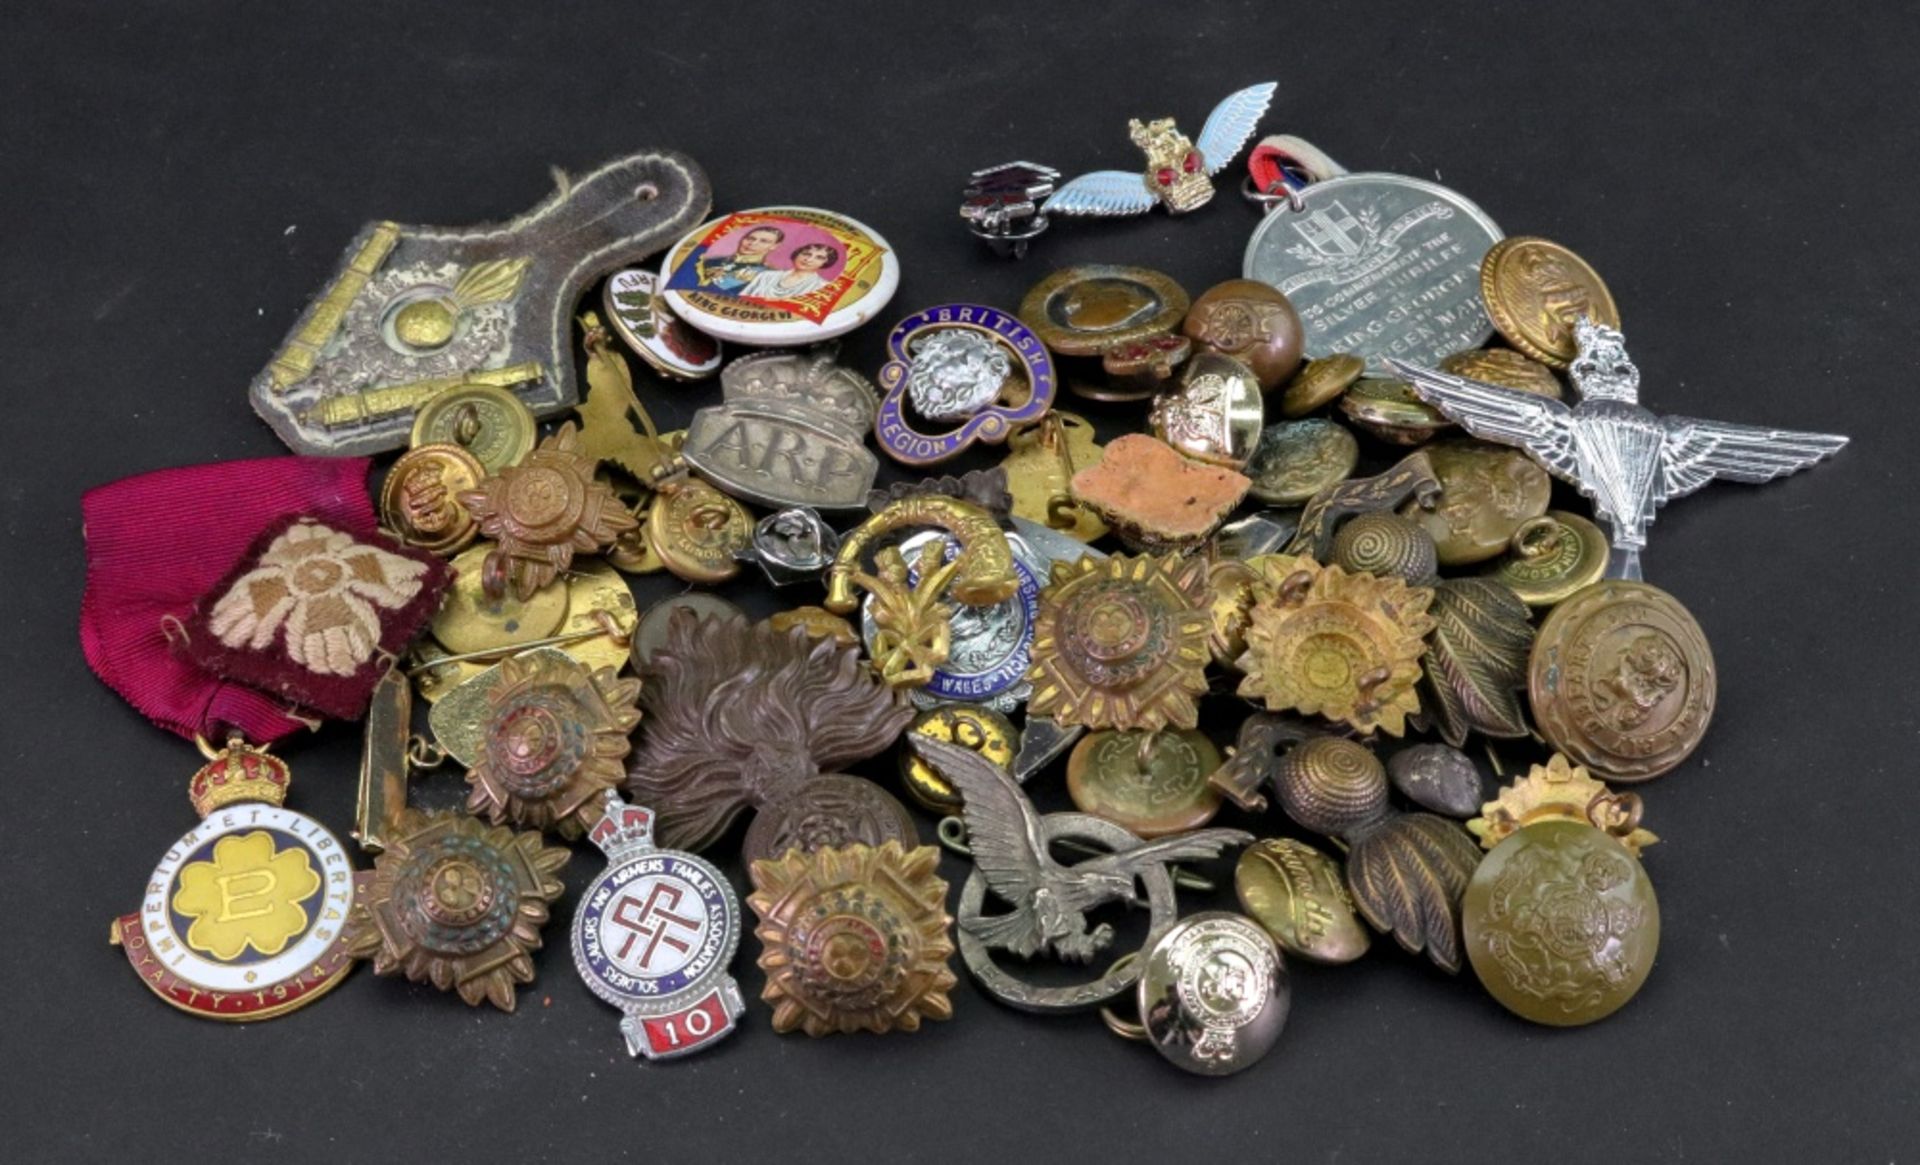 A large collection of Parachute Regiment and other regimental badges, buttons and insignia, an A.R.